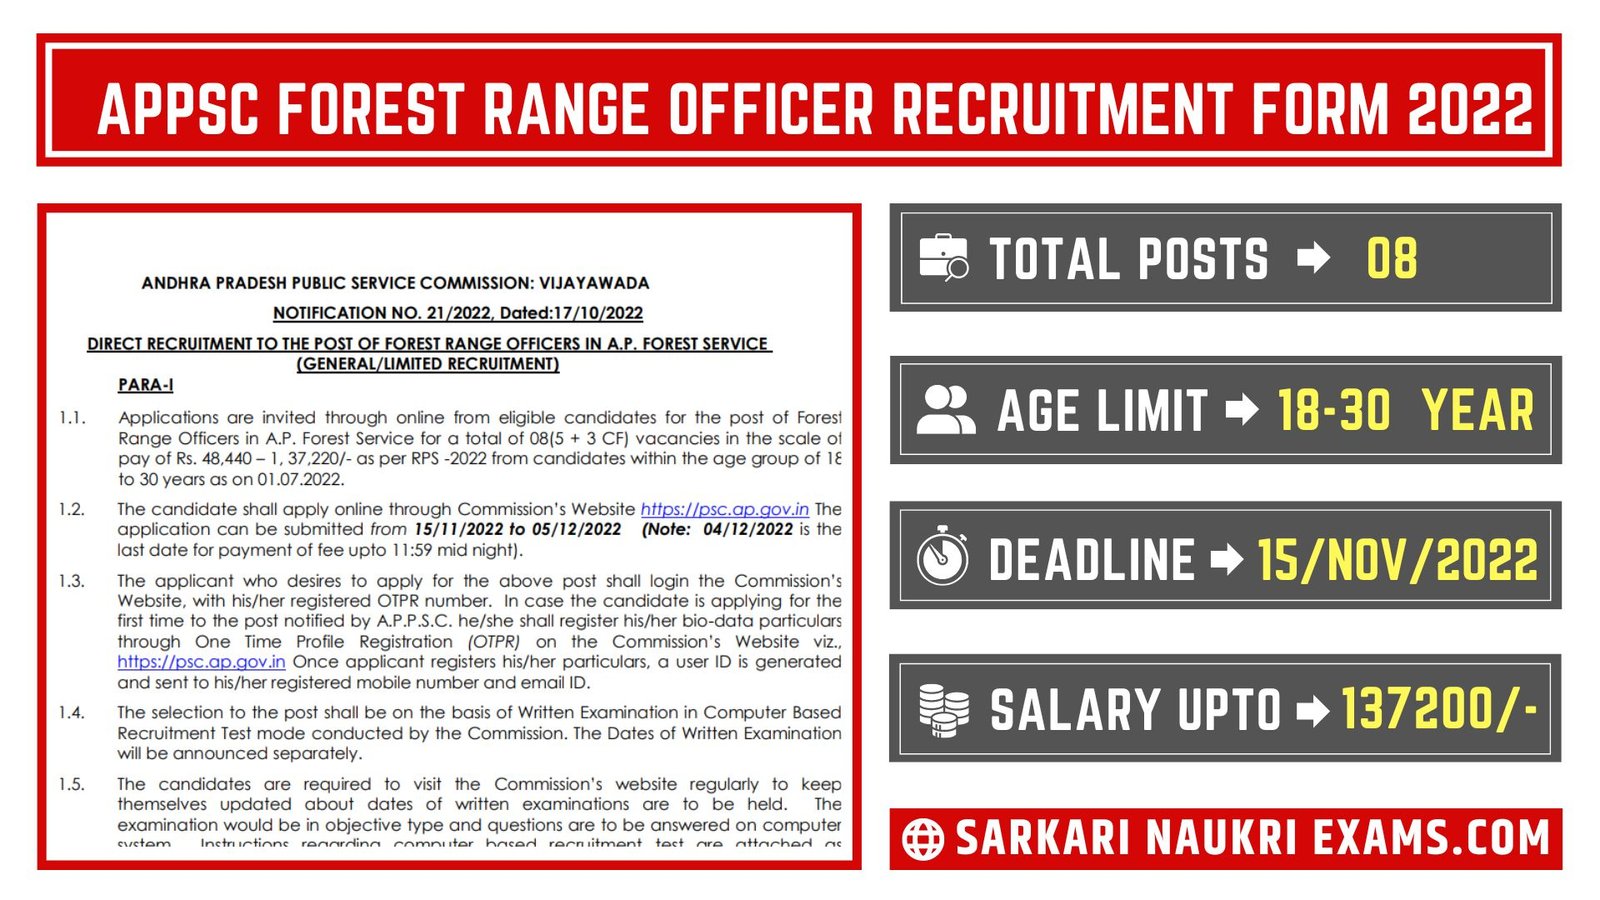 APPSC Forest Range Officer Recruitment Form 2022 | Salary Up To 137220/-